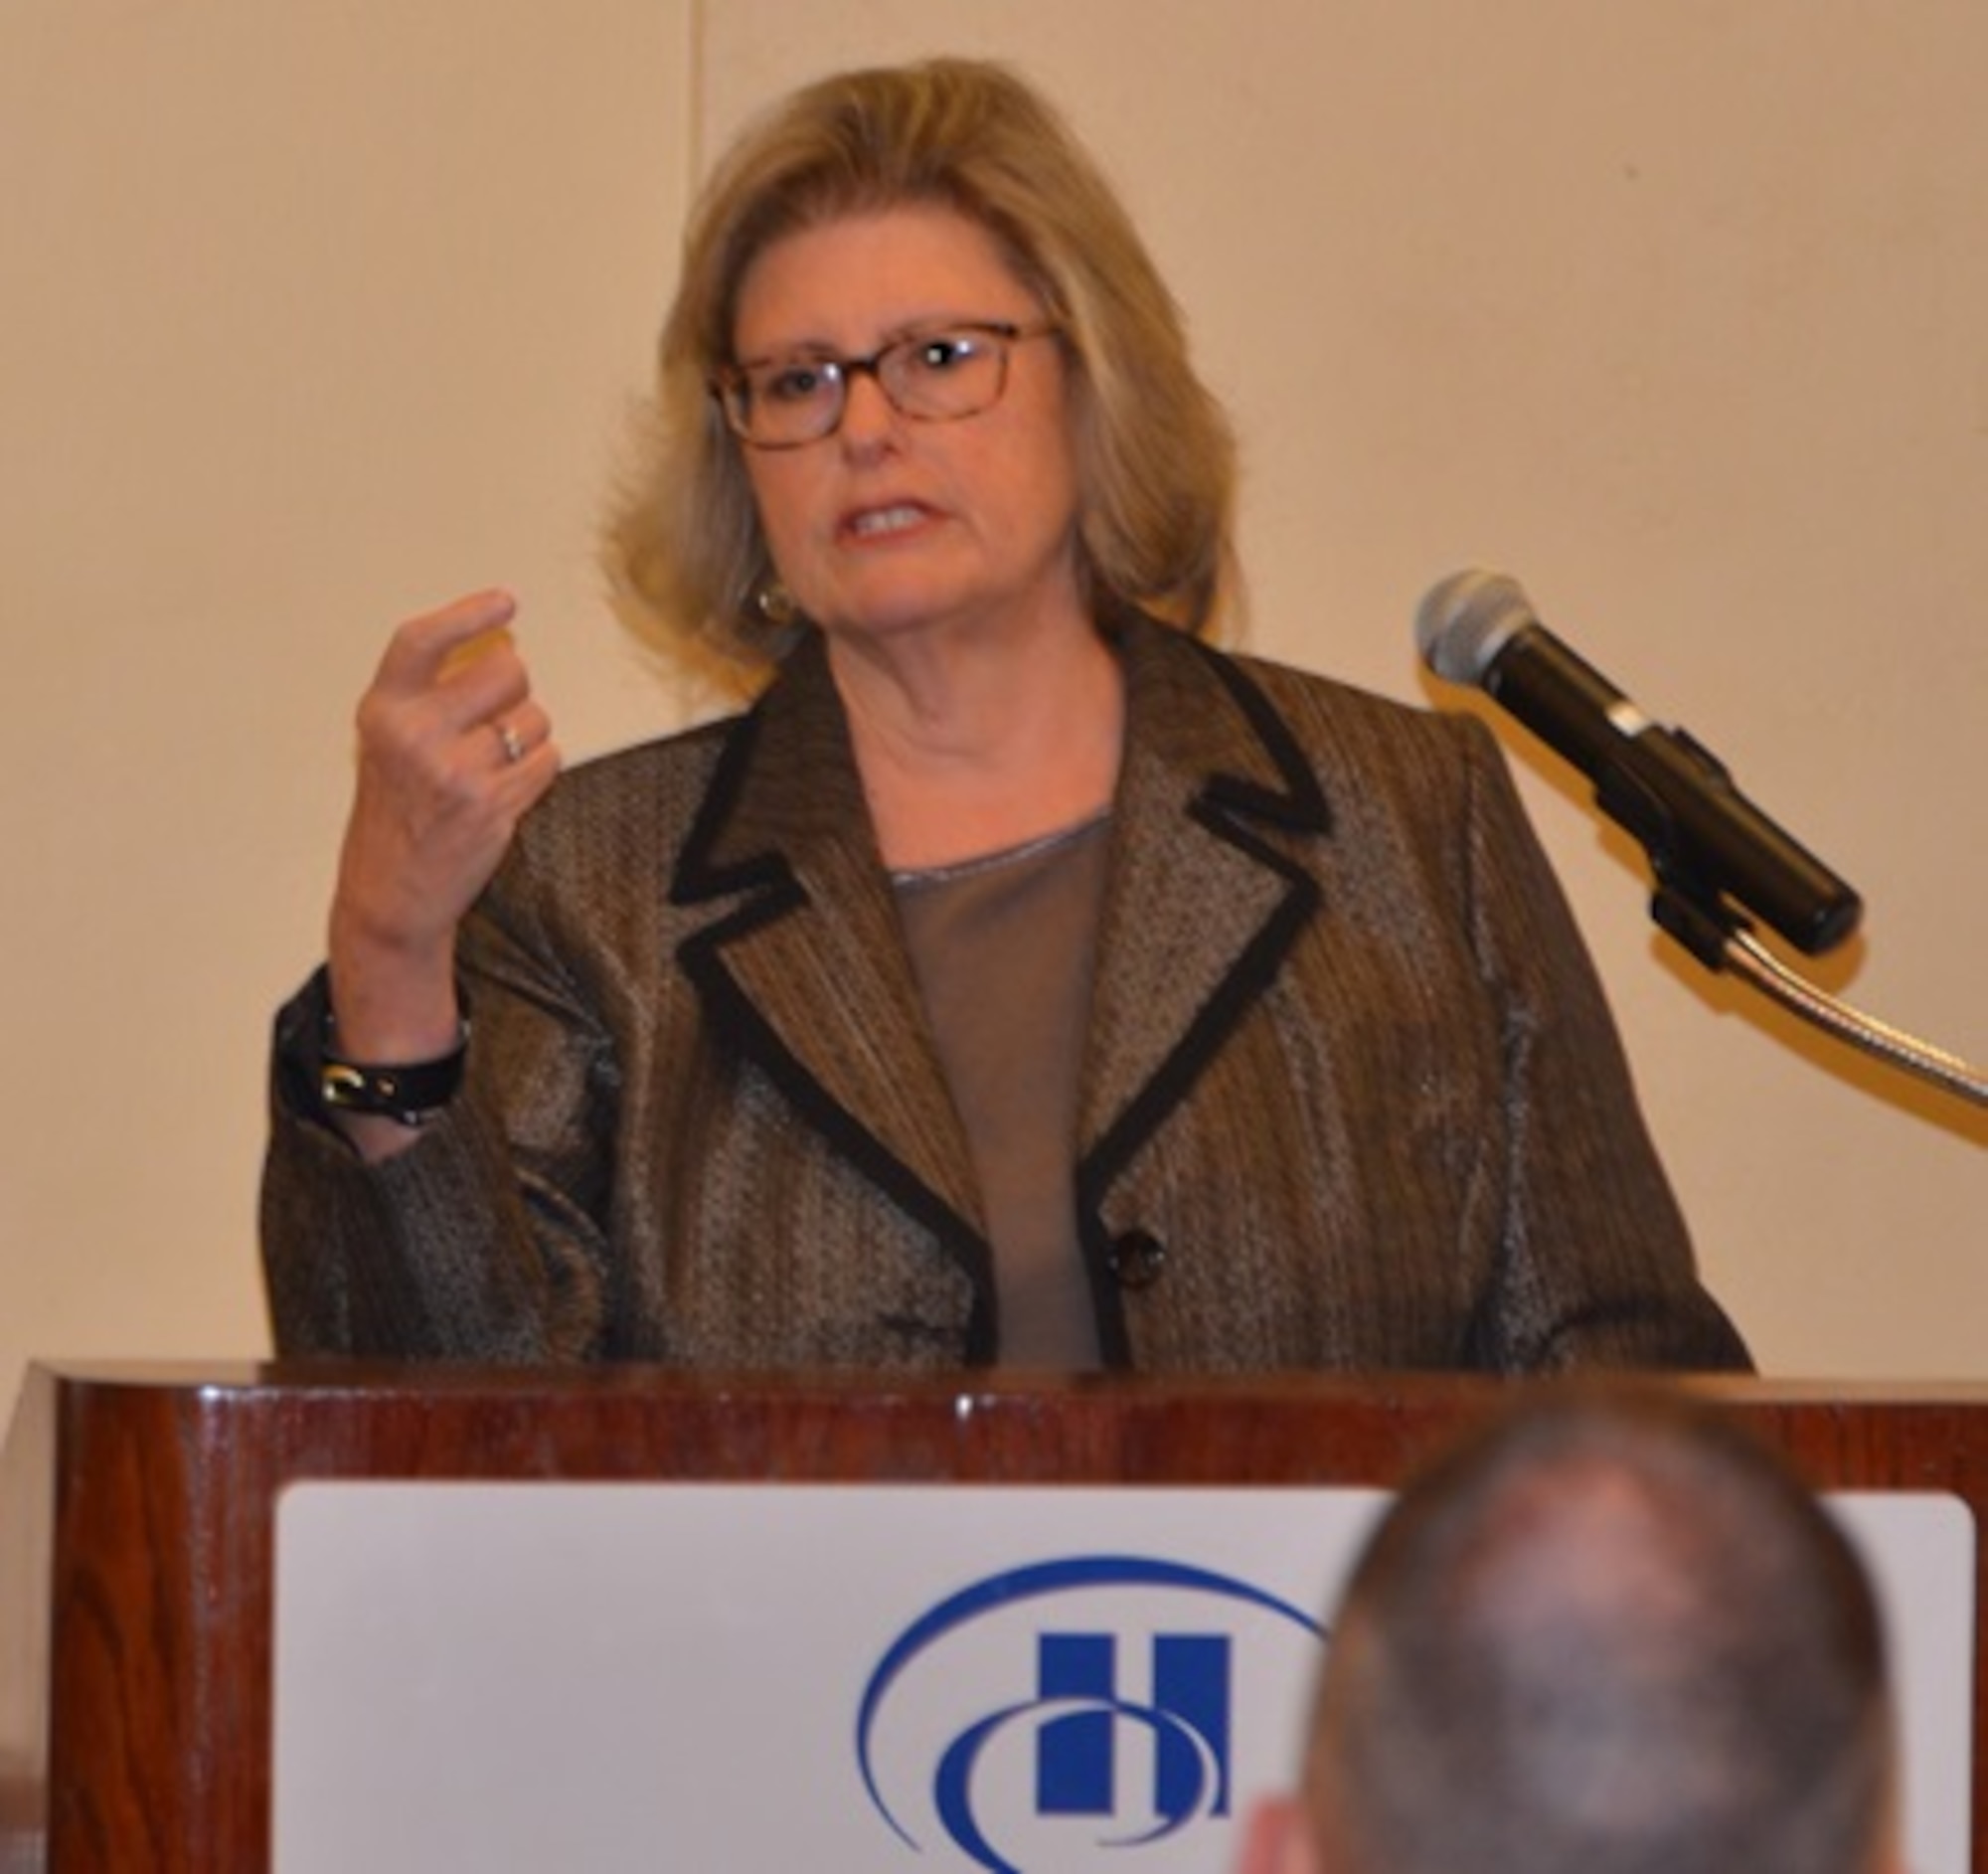 Monica Anders, director of the Resource Management Directorate at the Air Force Installation and Mission Support Center, welcomes workshop attendees, Jan. 30. Financial services technicians from around the Air Force gathered in San Antonio for the 2018 Air Force Financial Services Workshop, hosted by AFIMSC in partnership with the Air Force Accounting and Finance Office and Defense Finance and Accounting Service.